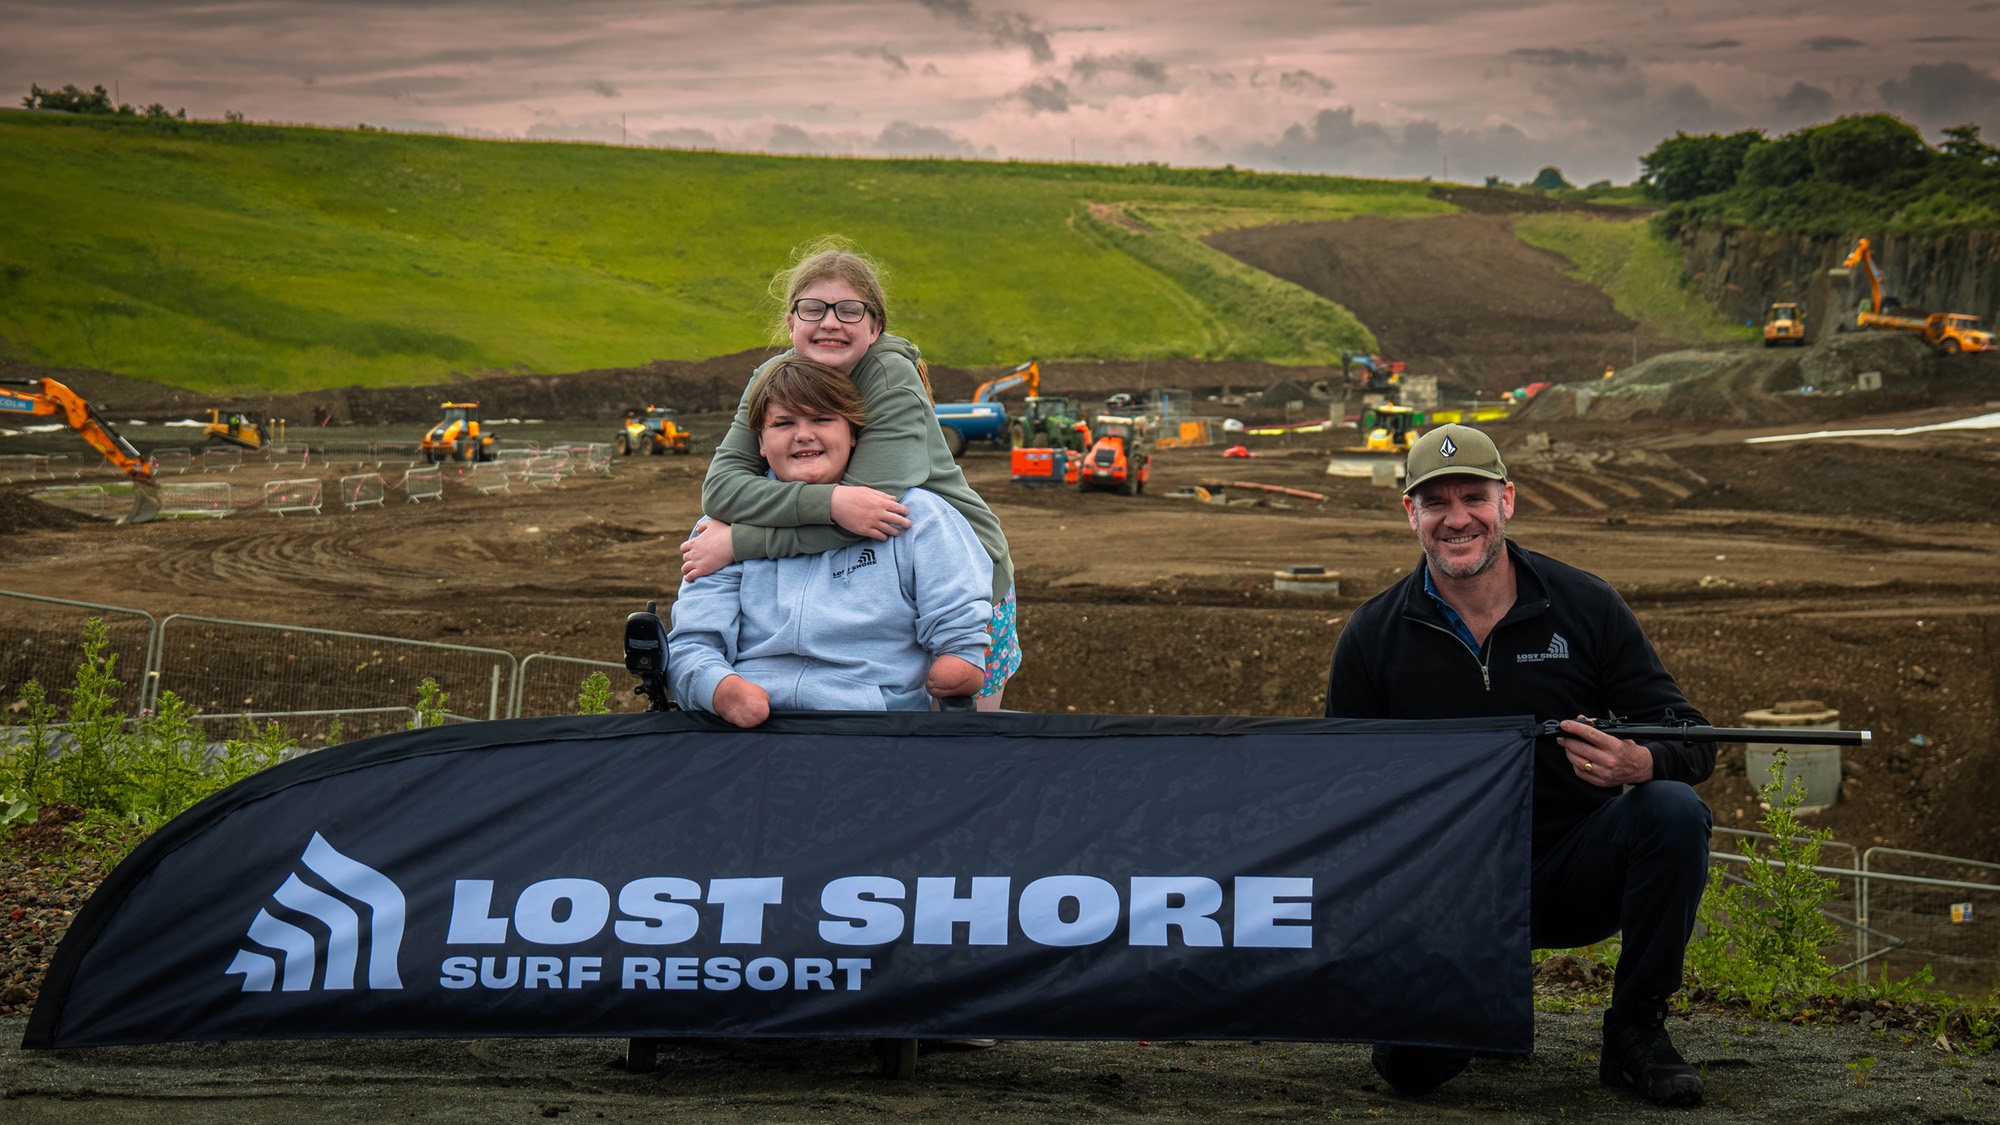 Jade Edward, who was the youngest ever female athlete at the International Surfing Association Para World Championships in California in December, has taken on a new role as an ambassador for a new inland surfing destination, Lost Shore Surf Resort, which will open in Scotland next year.